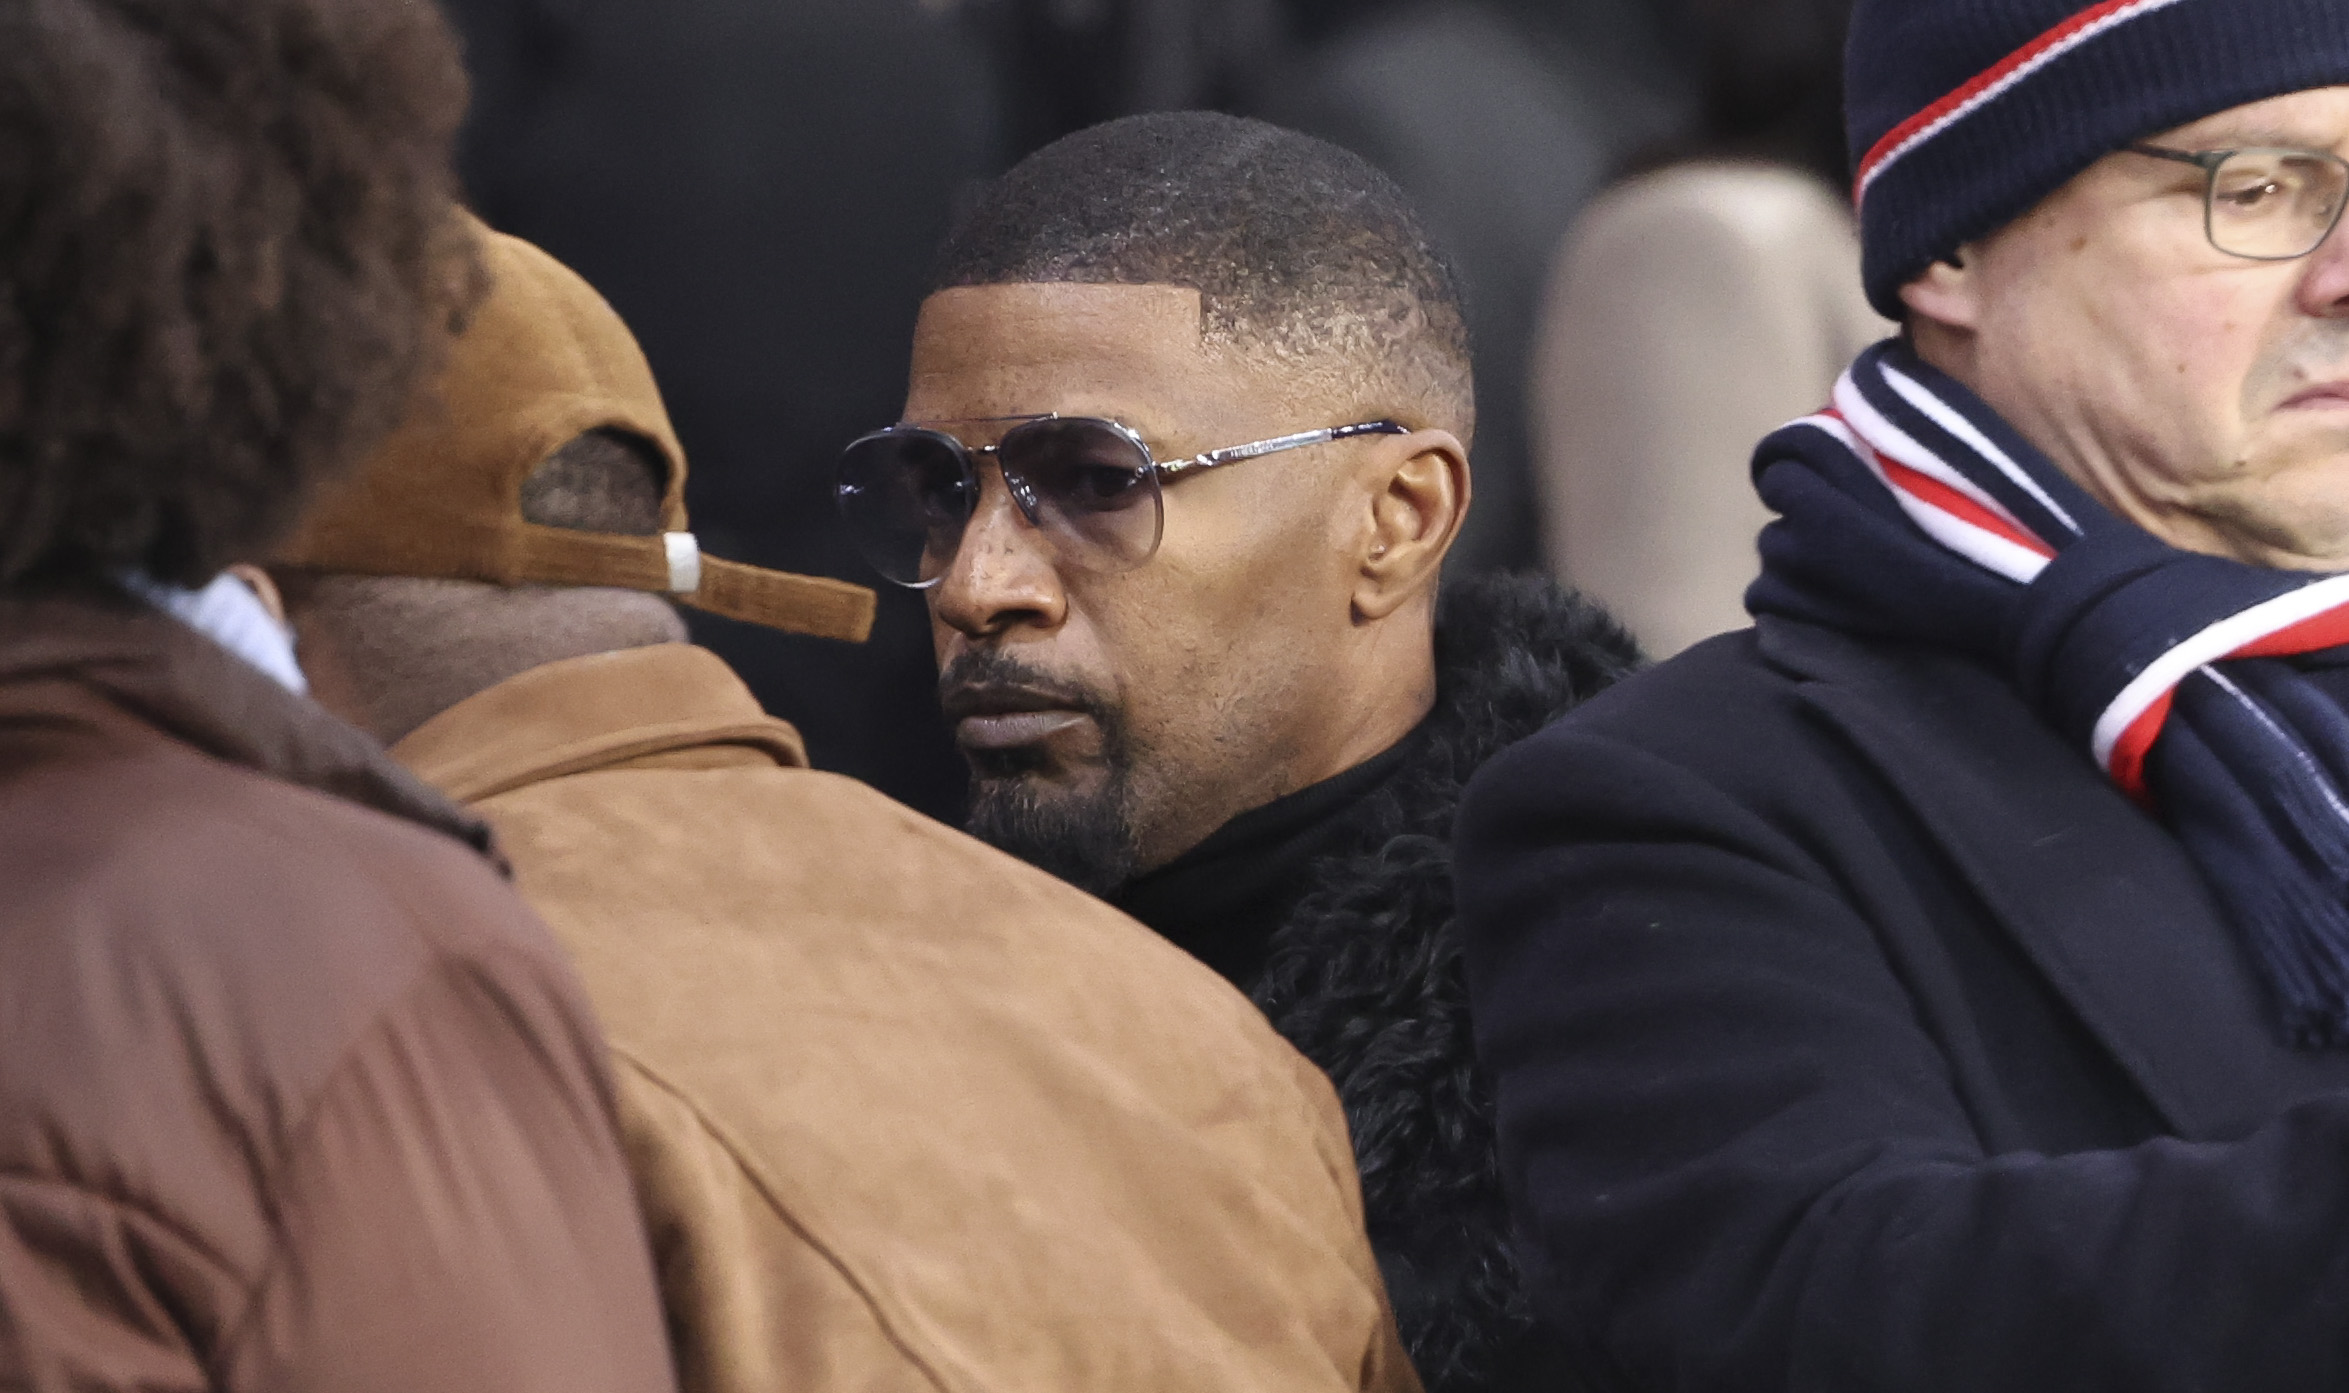 Jamie Foxx attends a soccer game in Paris in January 2023 | Source: Getty Images